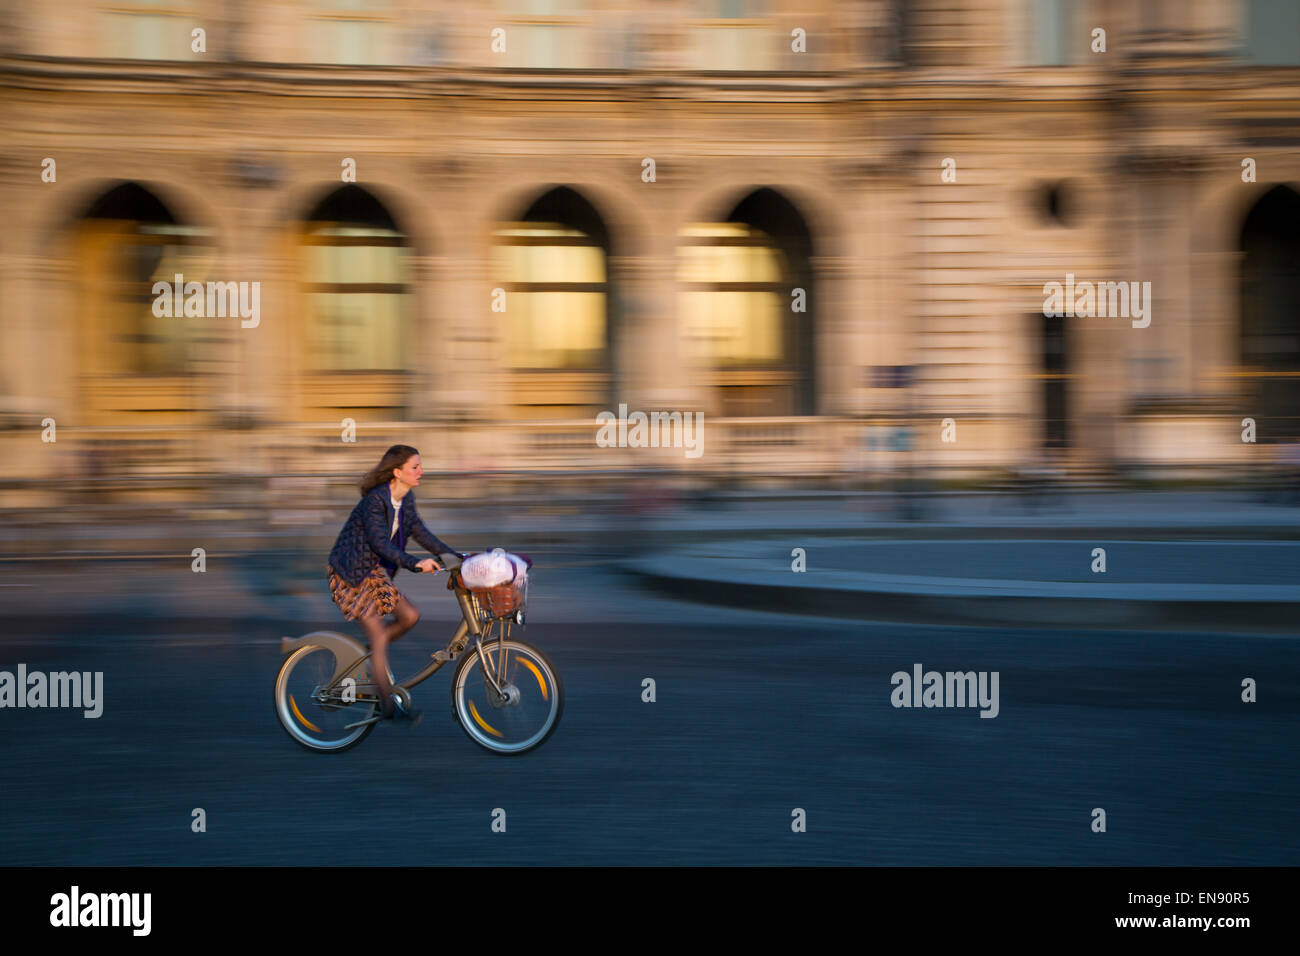 Panning photo of woman riding bicycle past Musee du Louvre at sunset, Paris, France Stock Photo